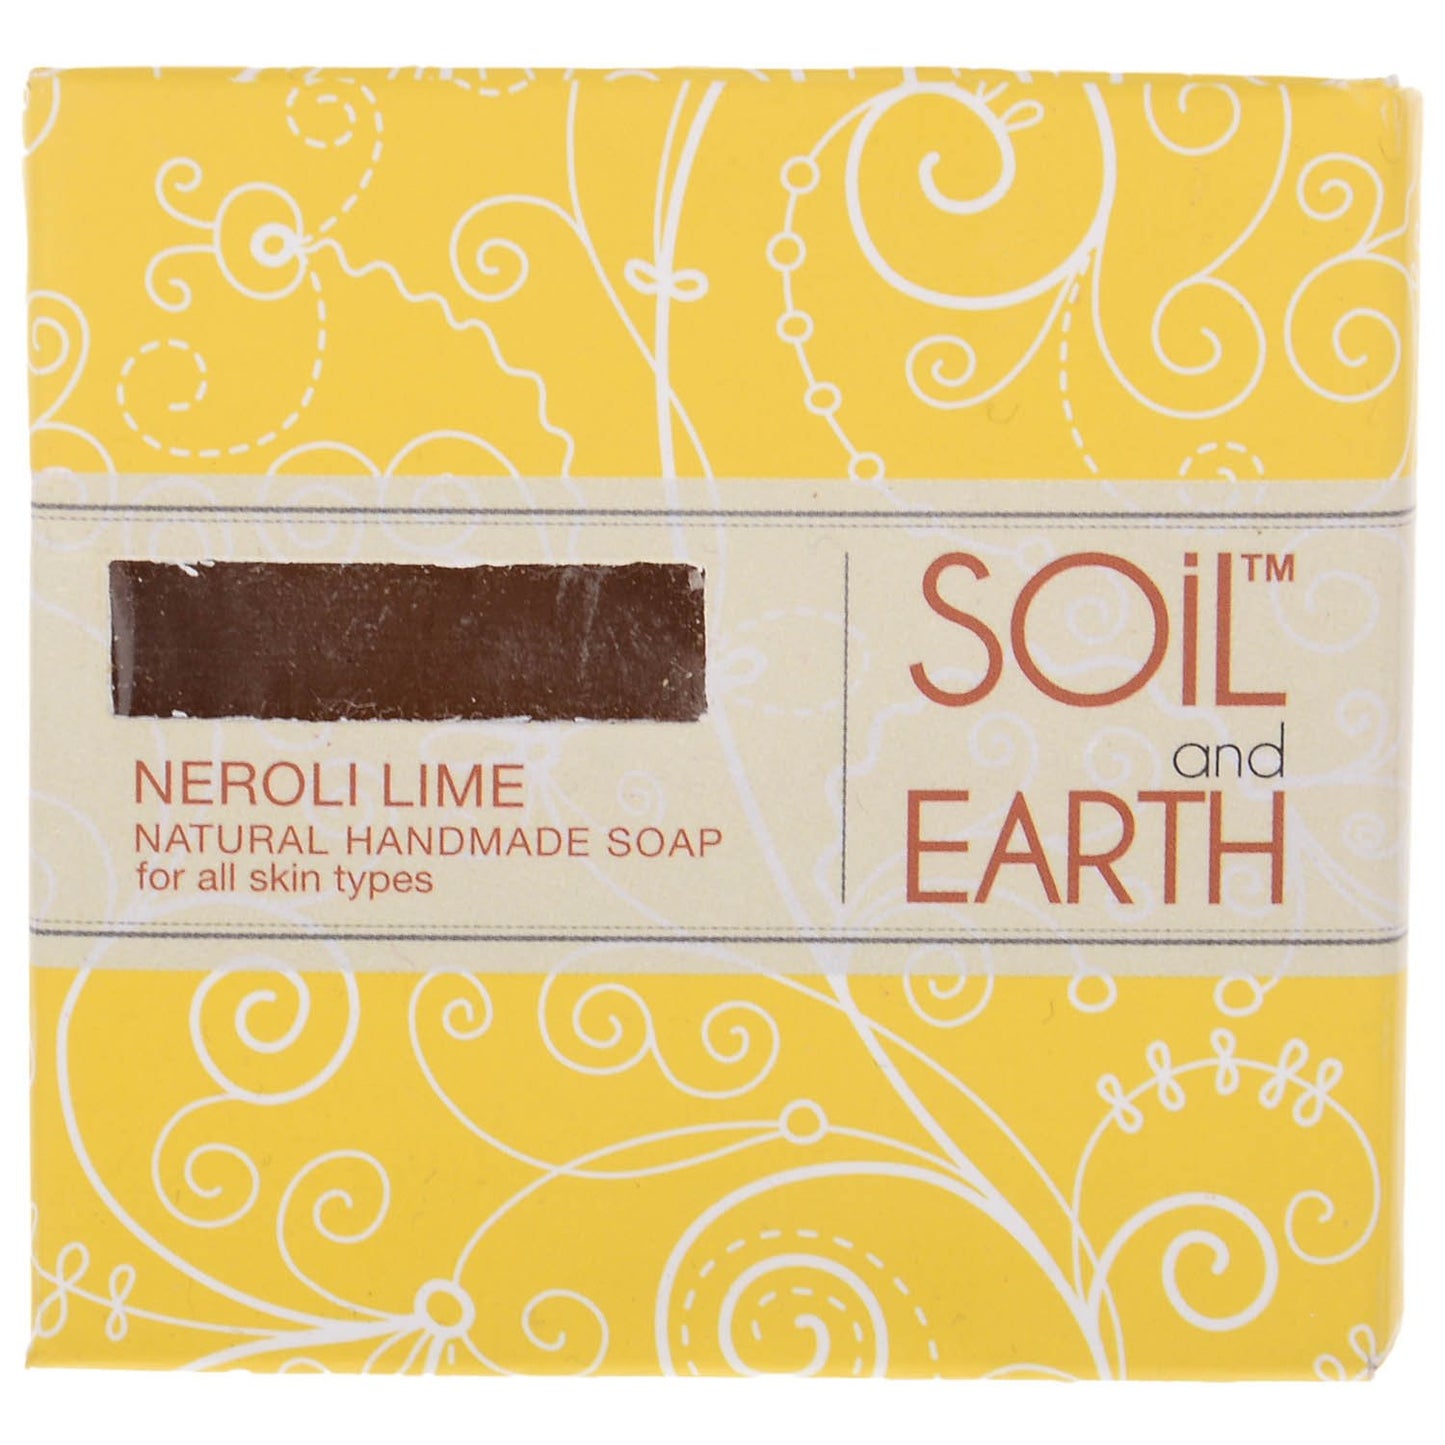 SOIL AND EARTH NATURAL HANDMADE SOAP - NEROLI LIME (Pack of 4)